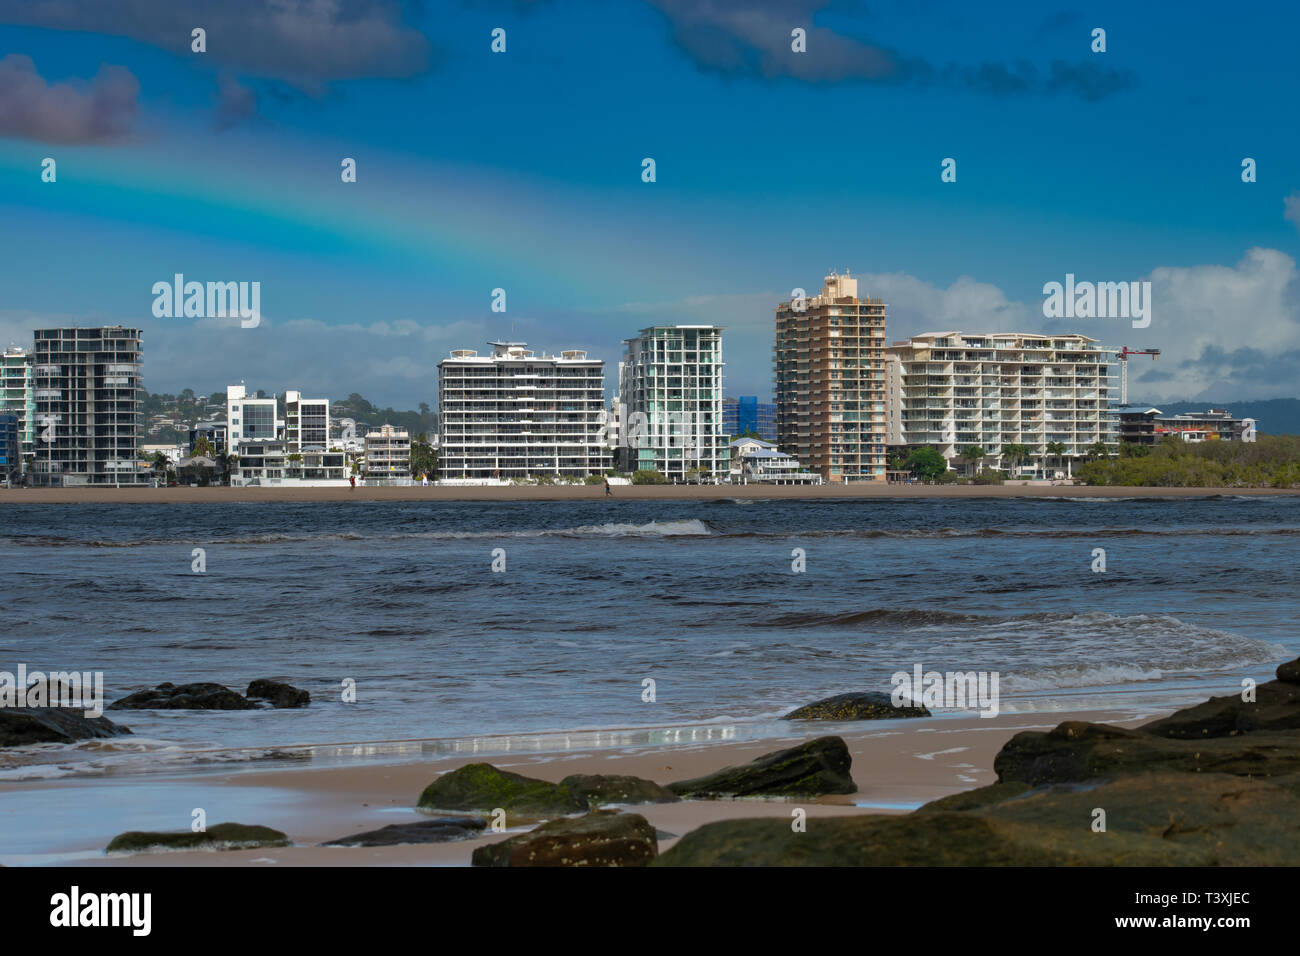 Maroochydore apartments skyline as seen from the North Shore Beach, Queensland, Australia Stock Photo